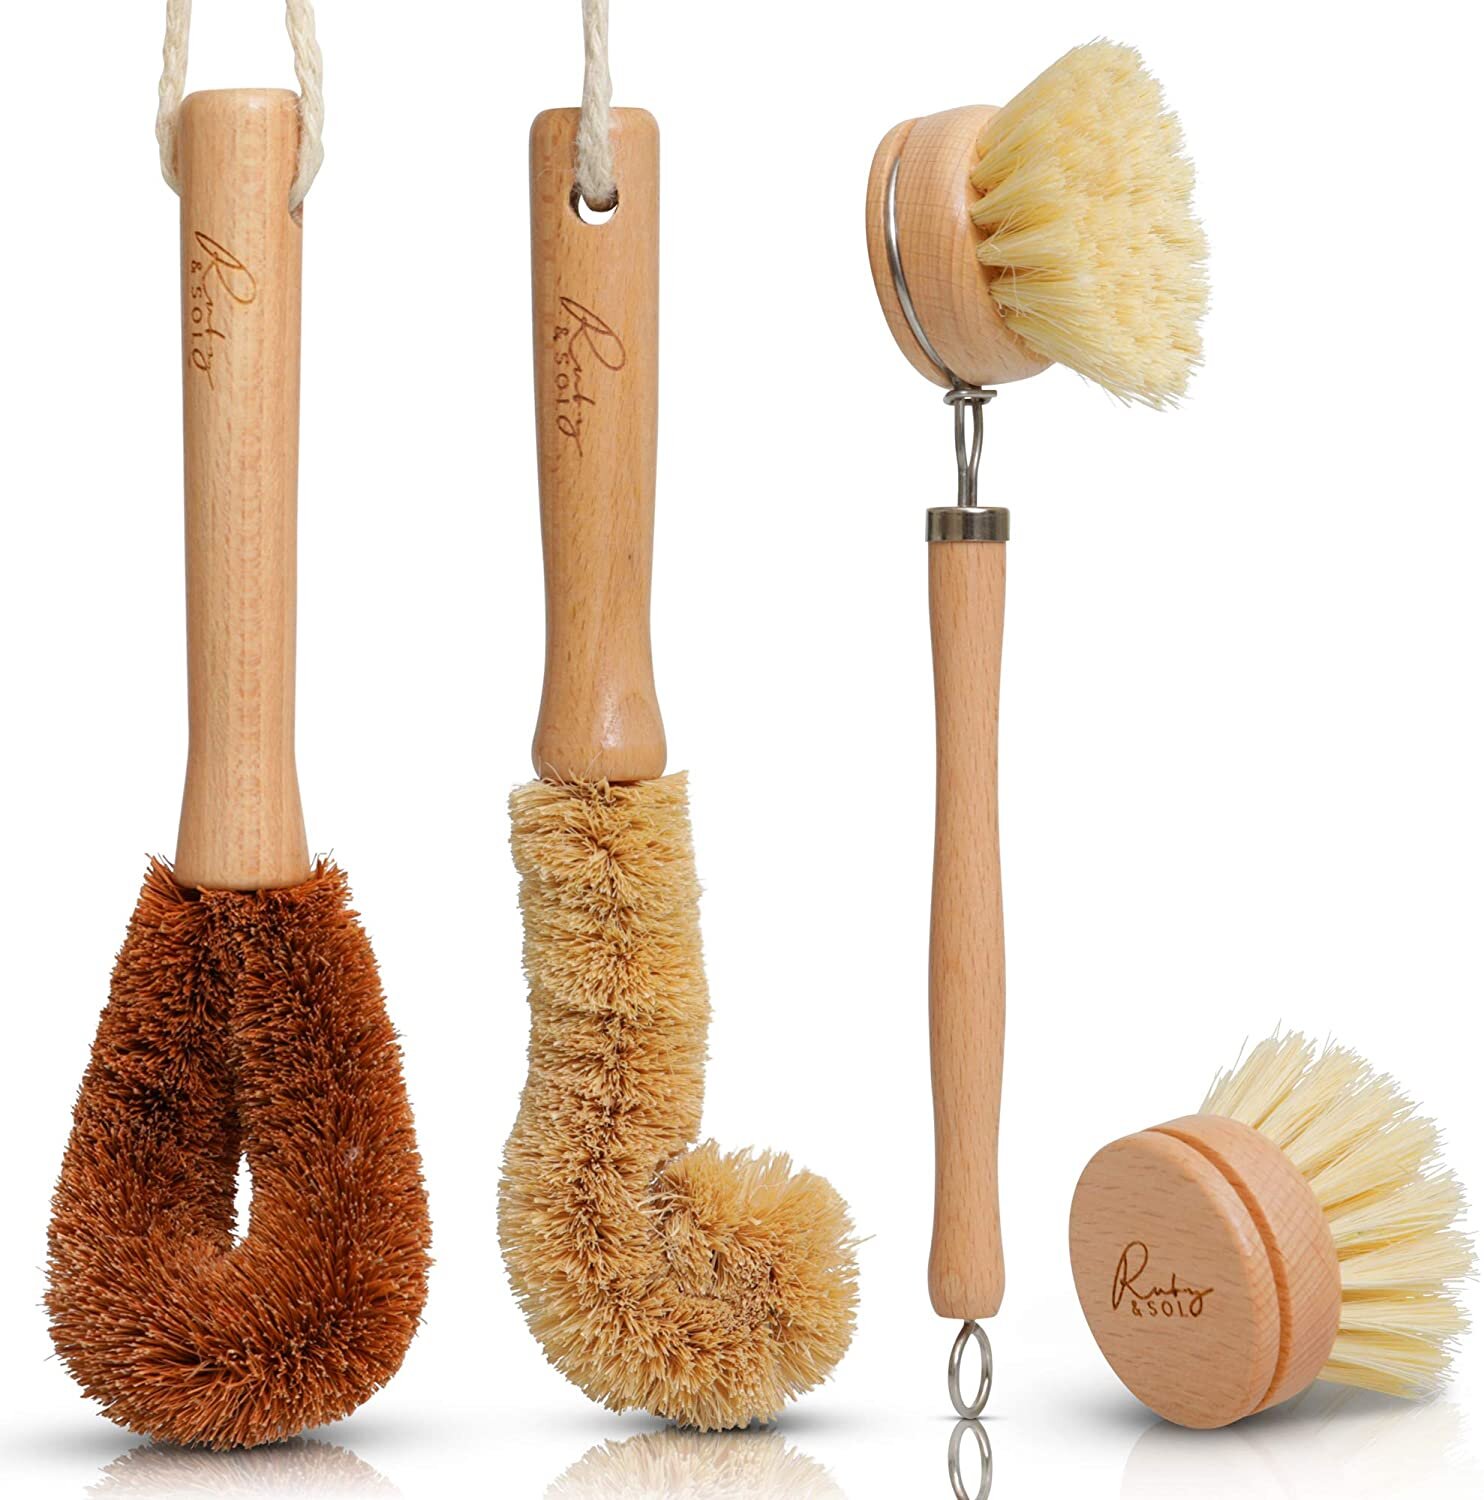 Natural wood cleaning brush set